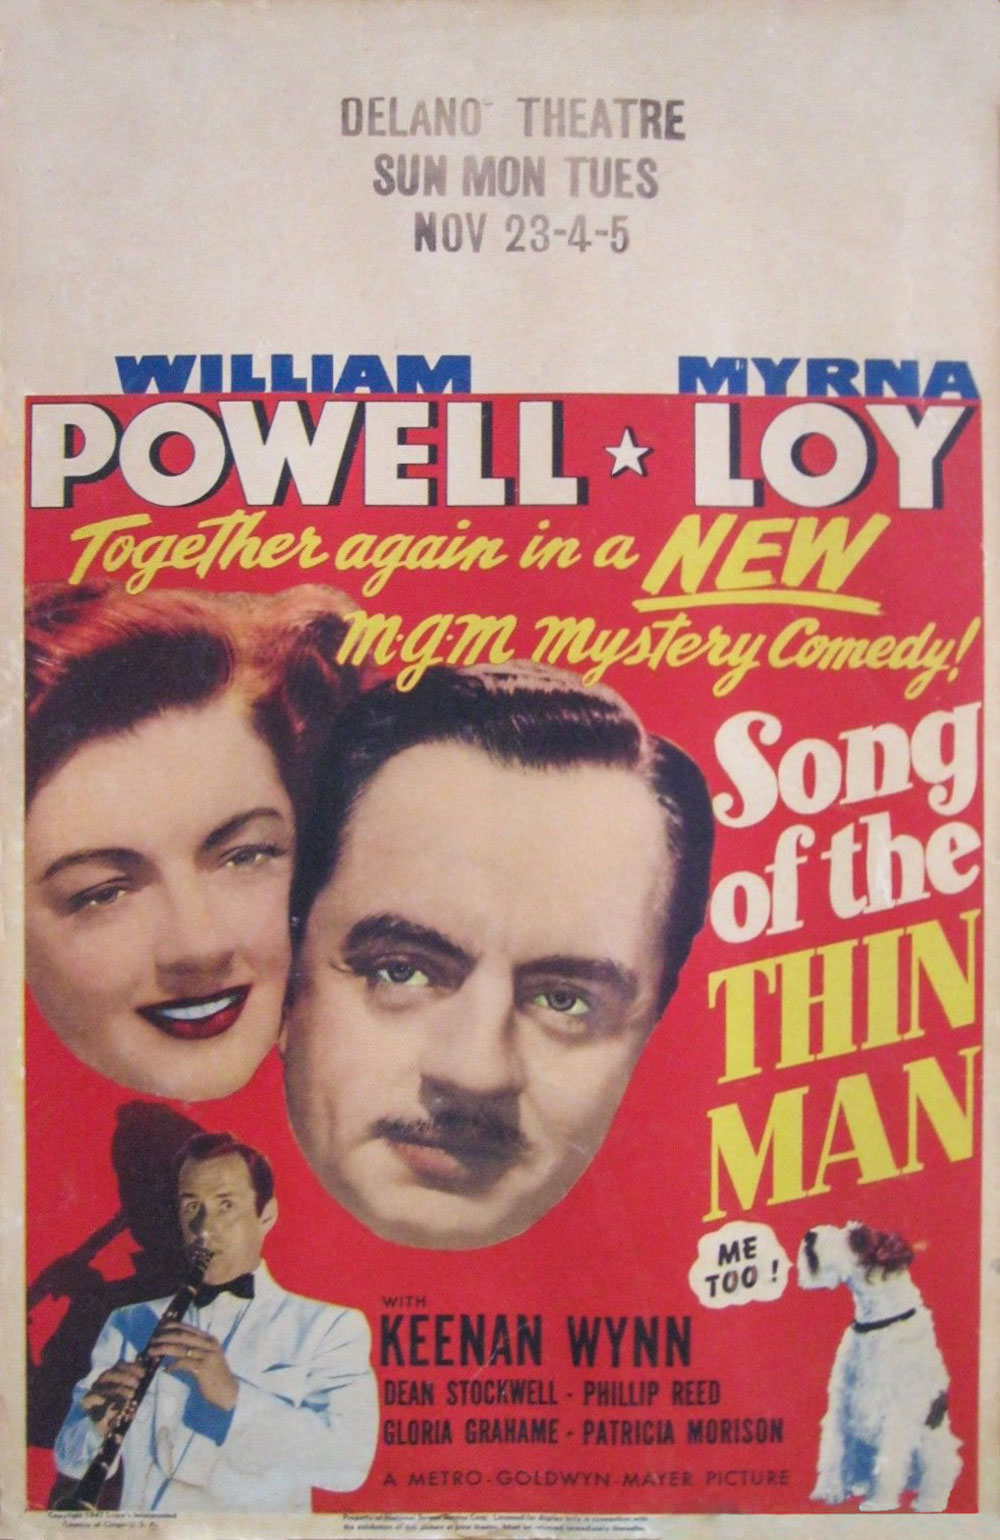 song of the thin man us window card